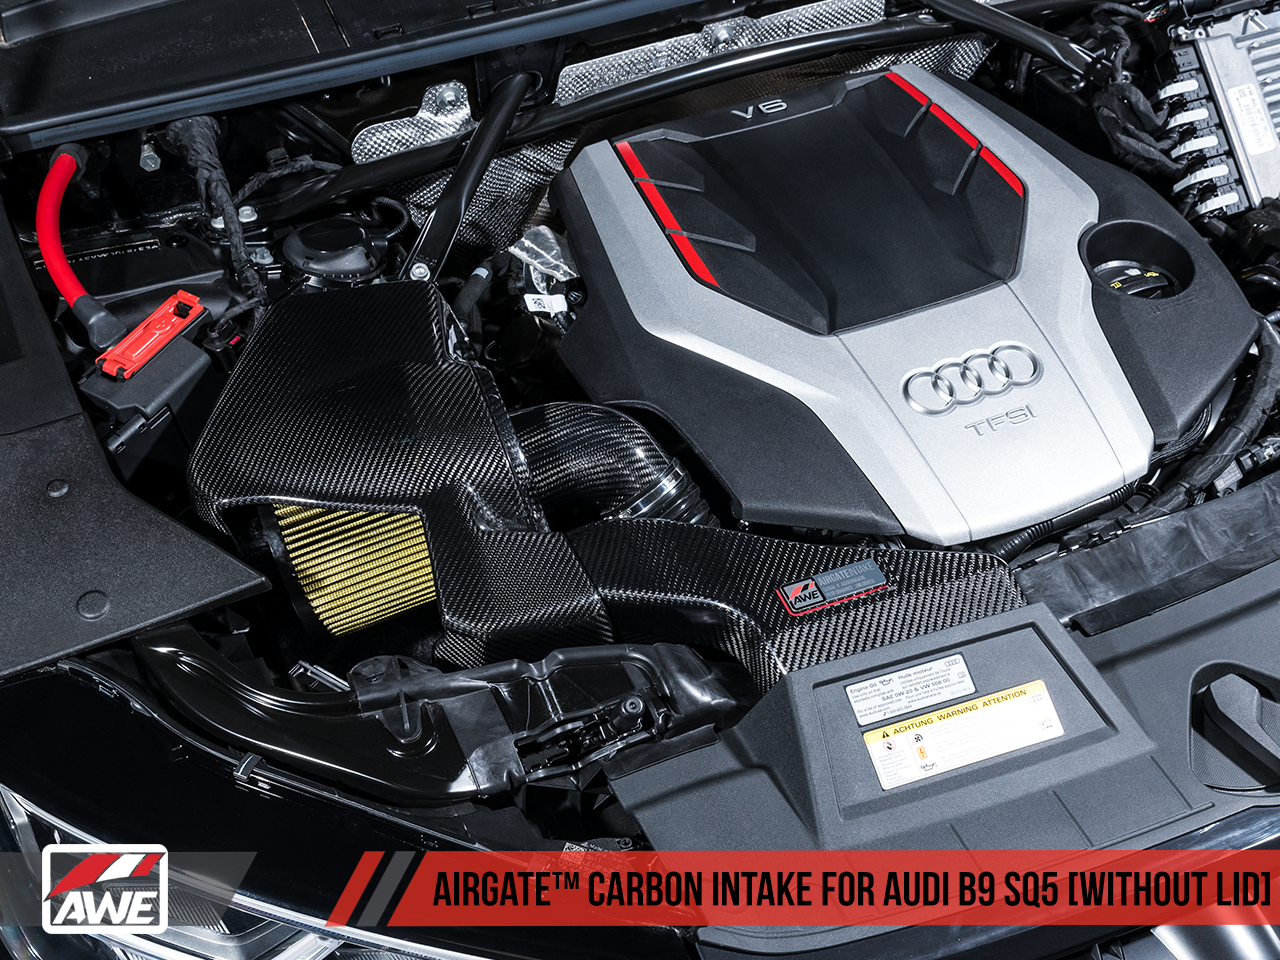 AWE AirGate Carbon Intake for B9 SQ5 (With Lid)